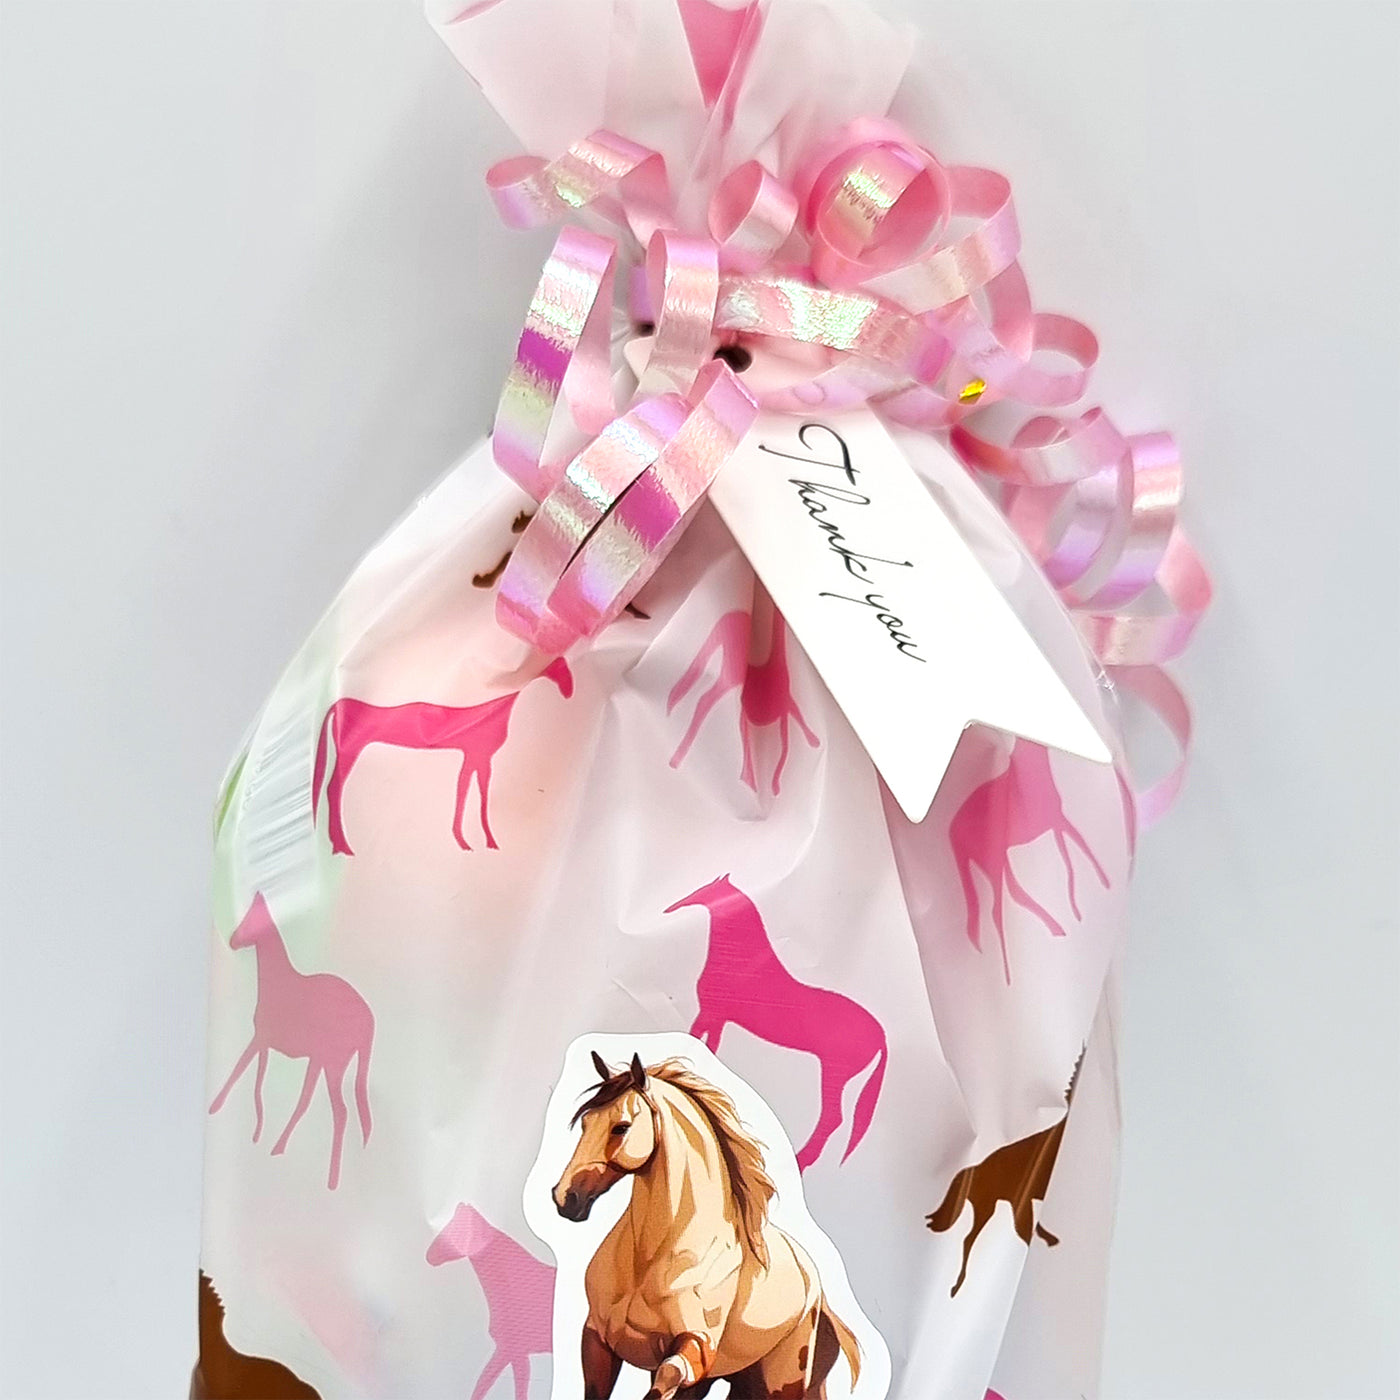 Pre Filled Birthday Horse Pony Birthday Party Goody Bags With Toys And Vegan Sweets.